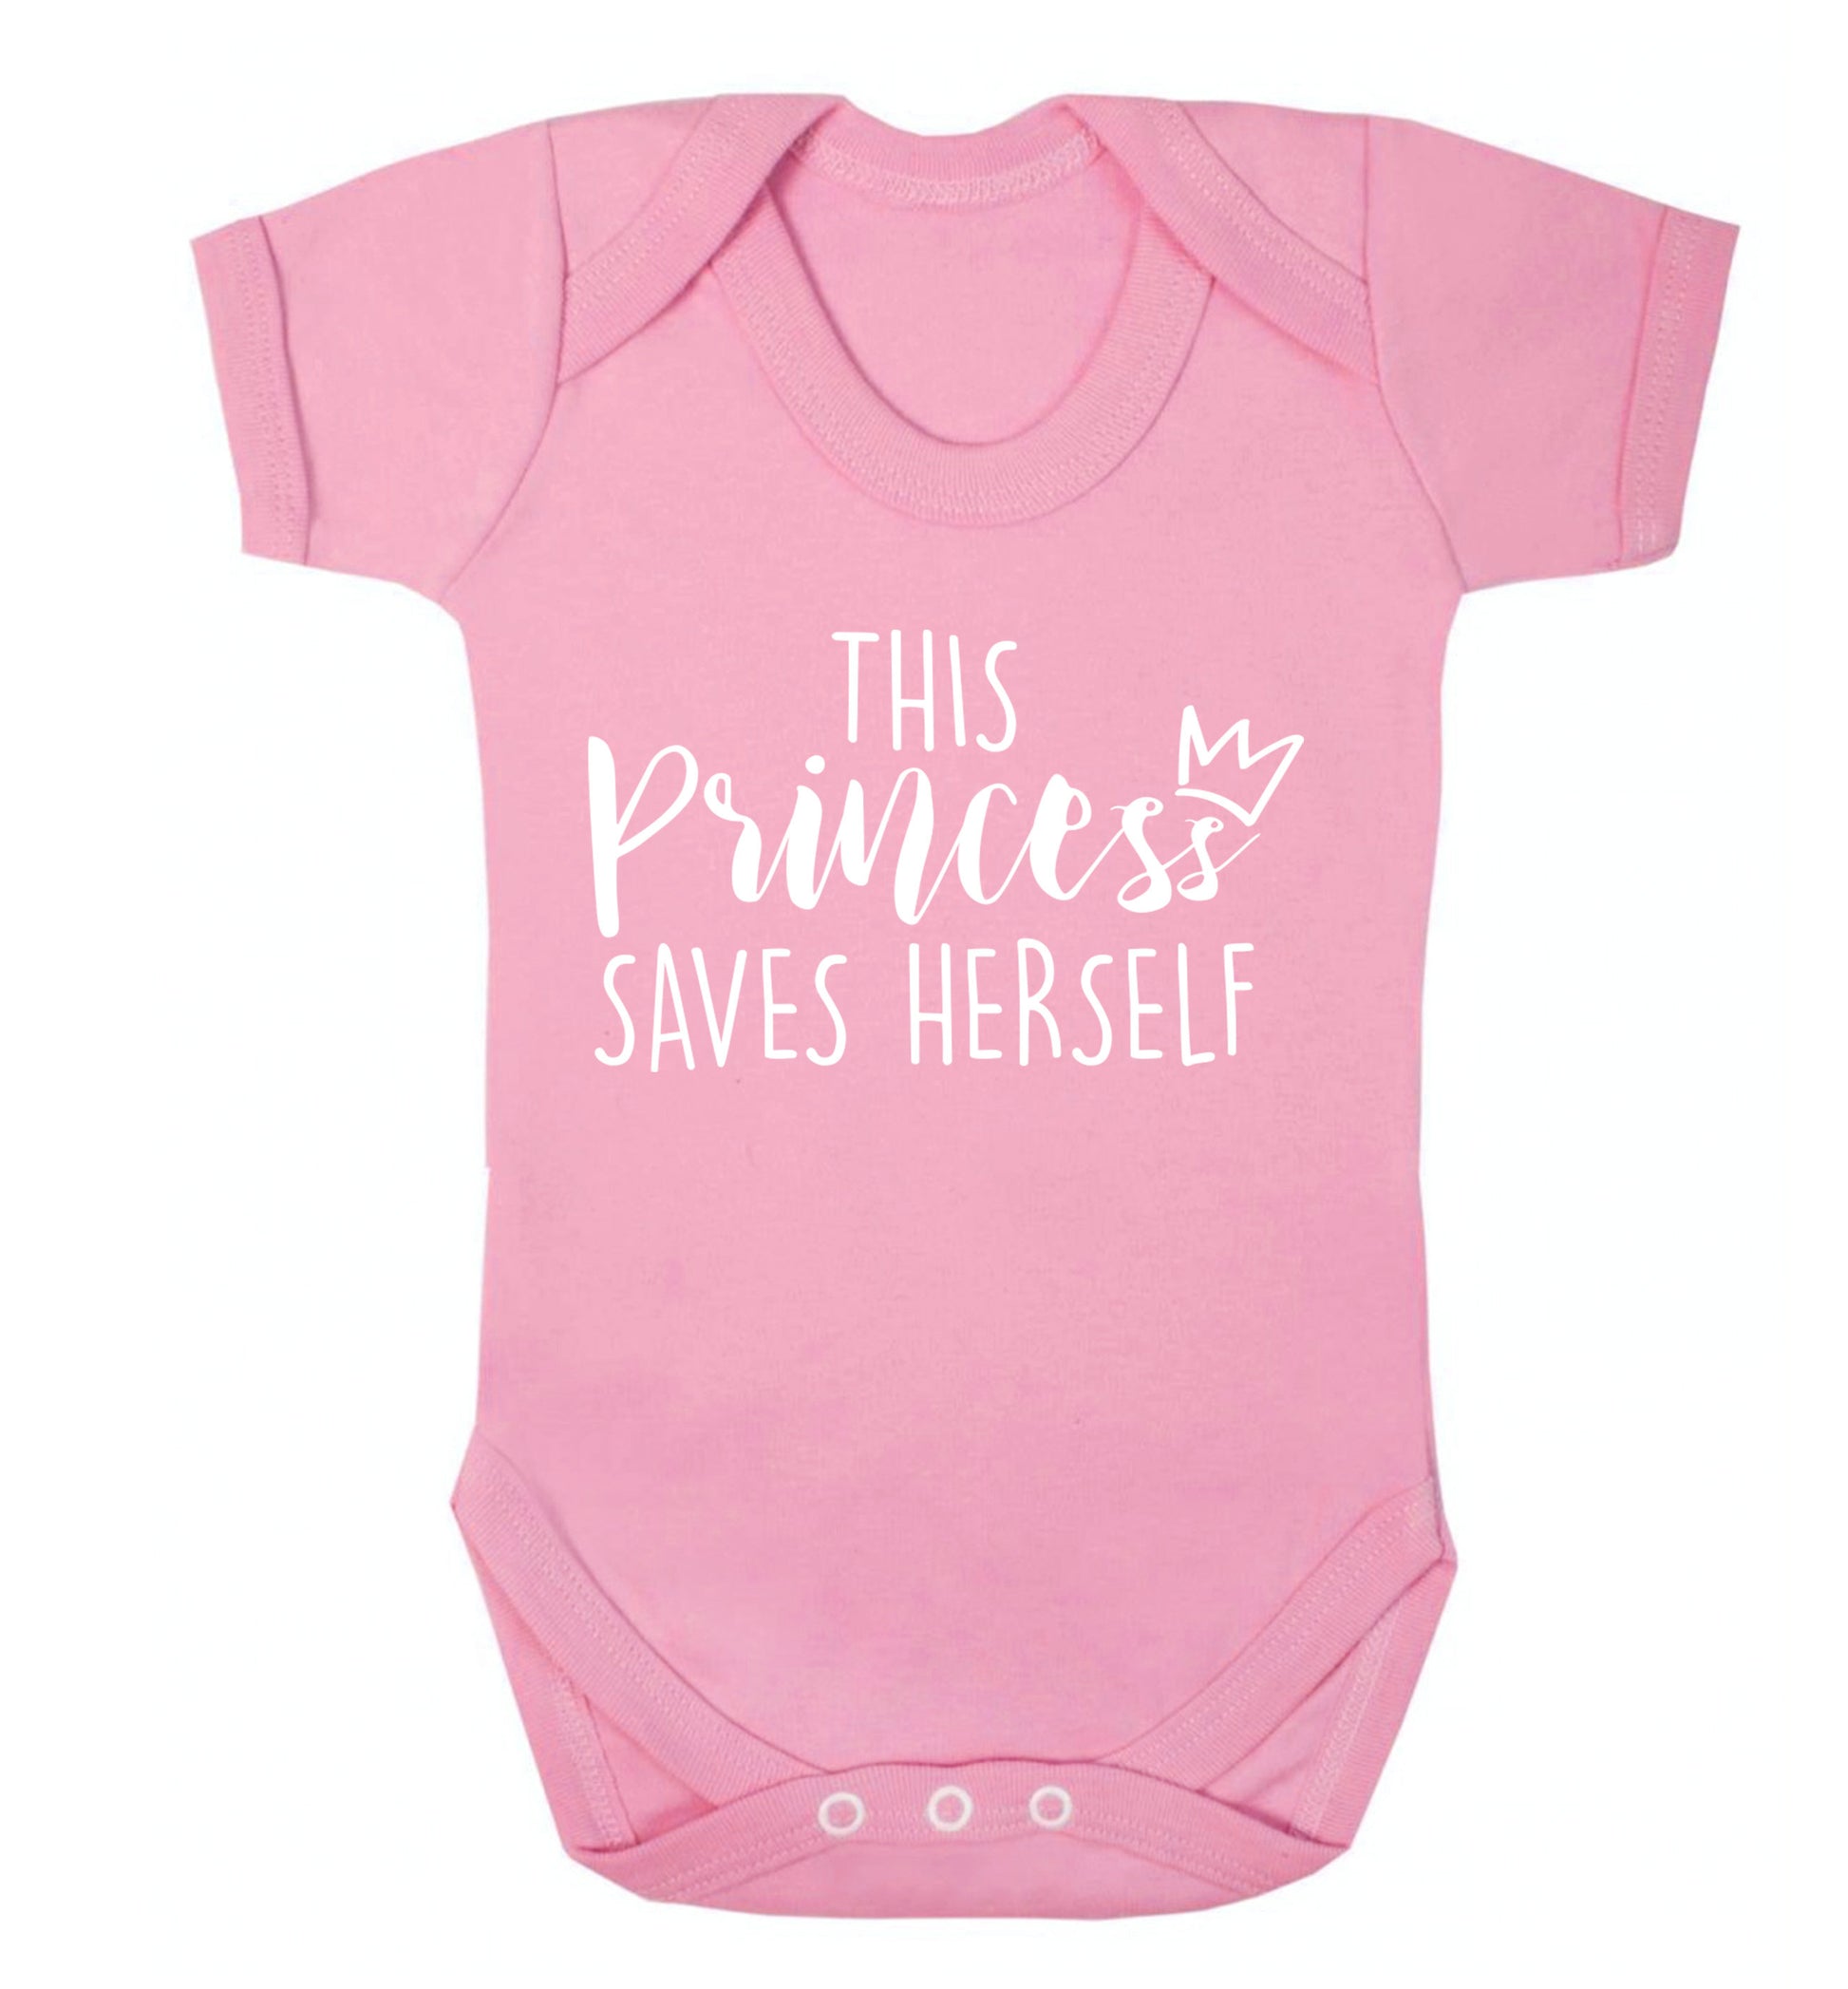 This princess saves herself Baby Vest pale pink 18-24 months